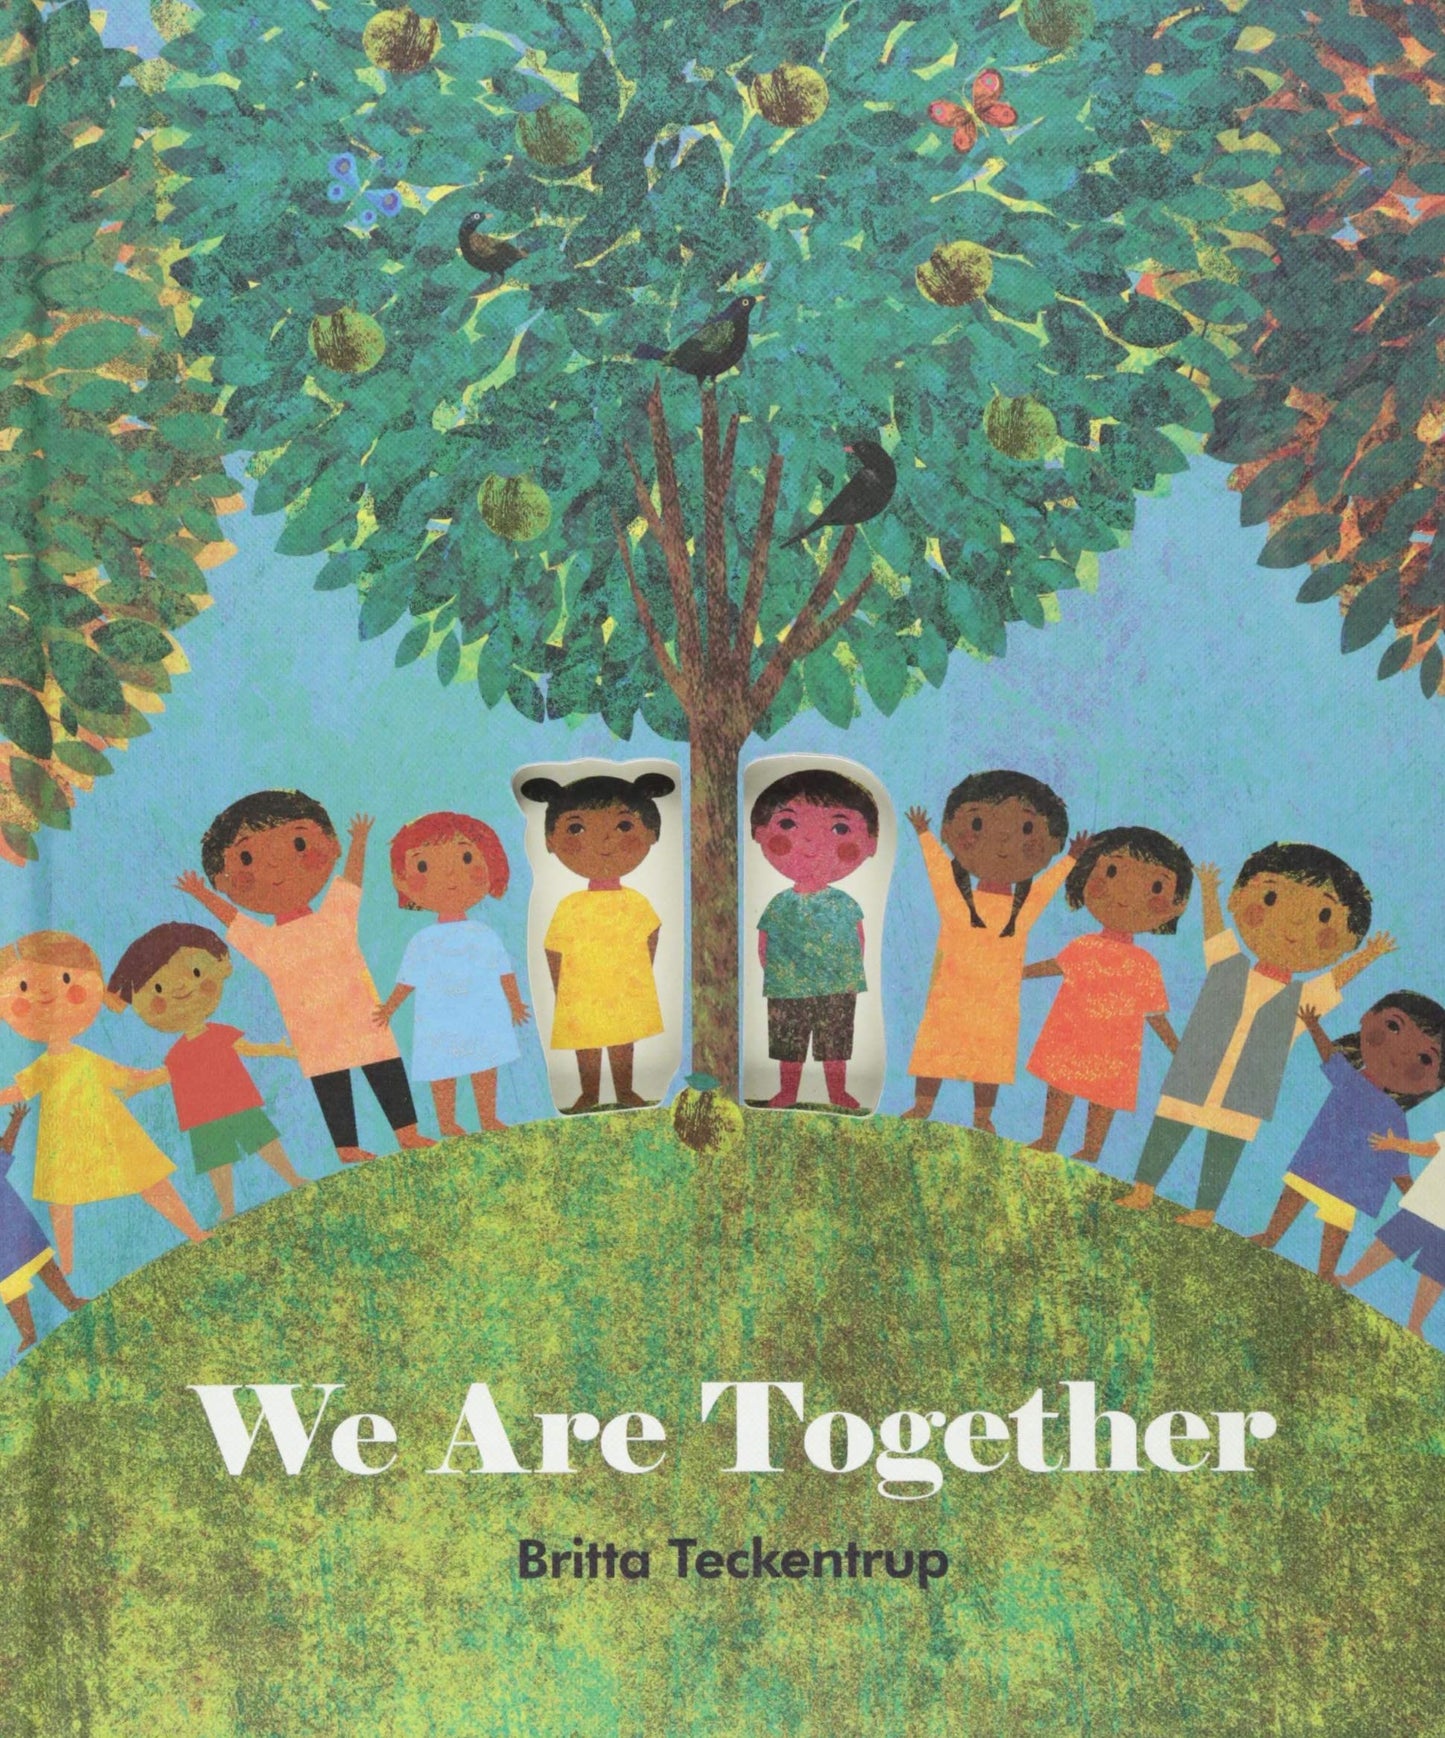 We Are Together by Britta Teckentrop